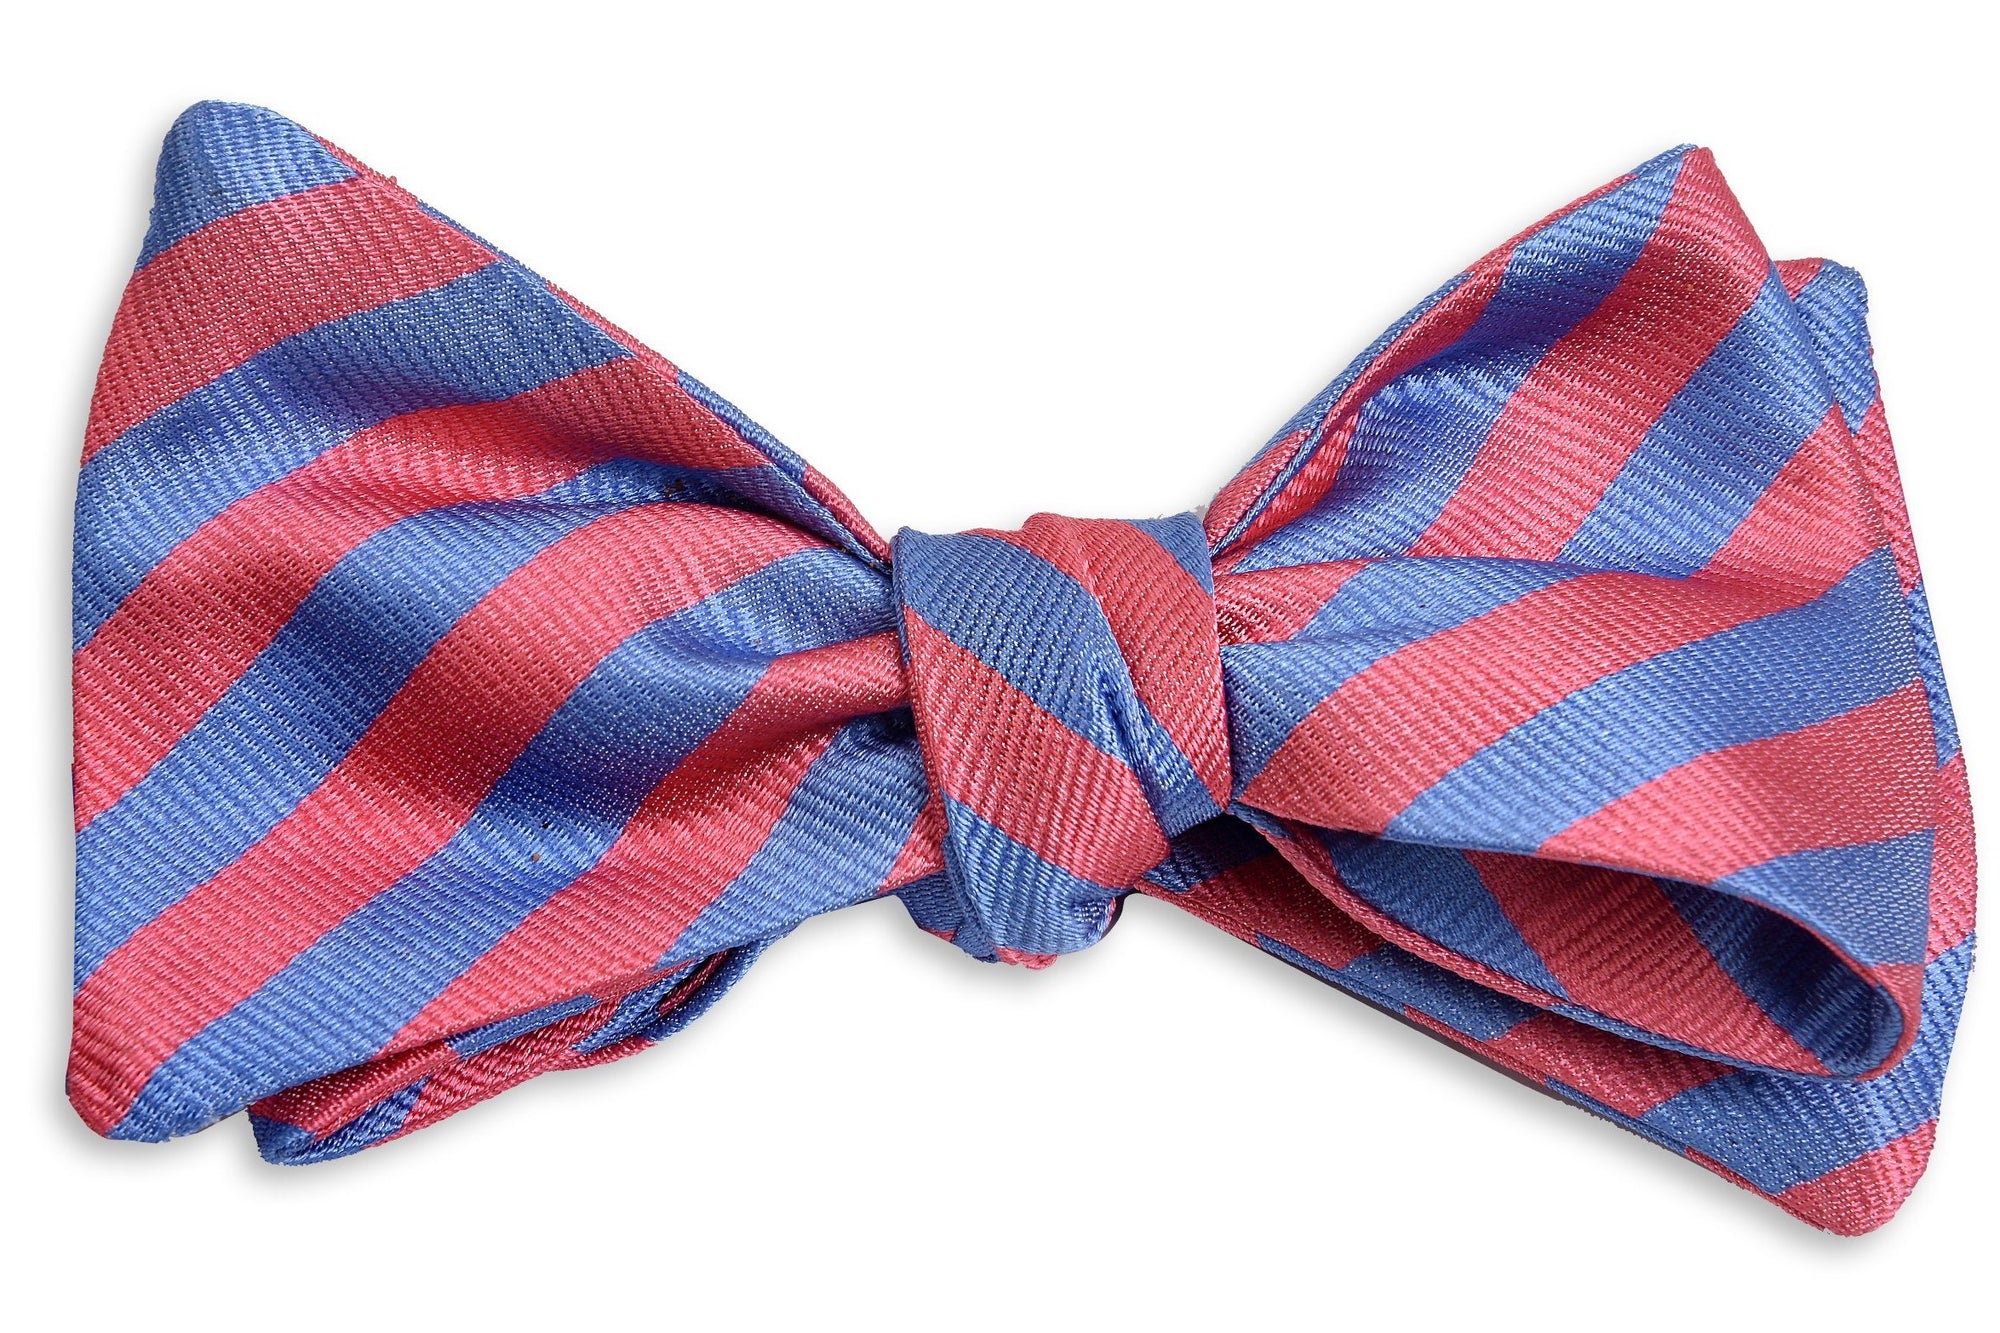 Pink and blue men's bow tie. Made from 100% silk with a striped pattern.